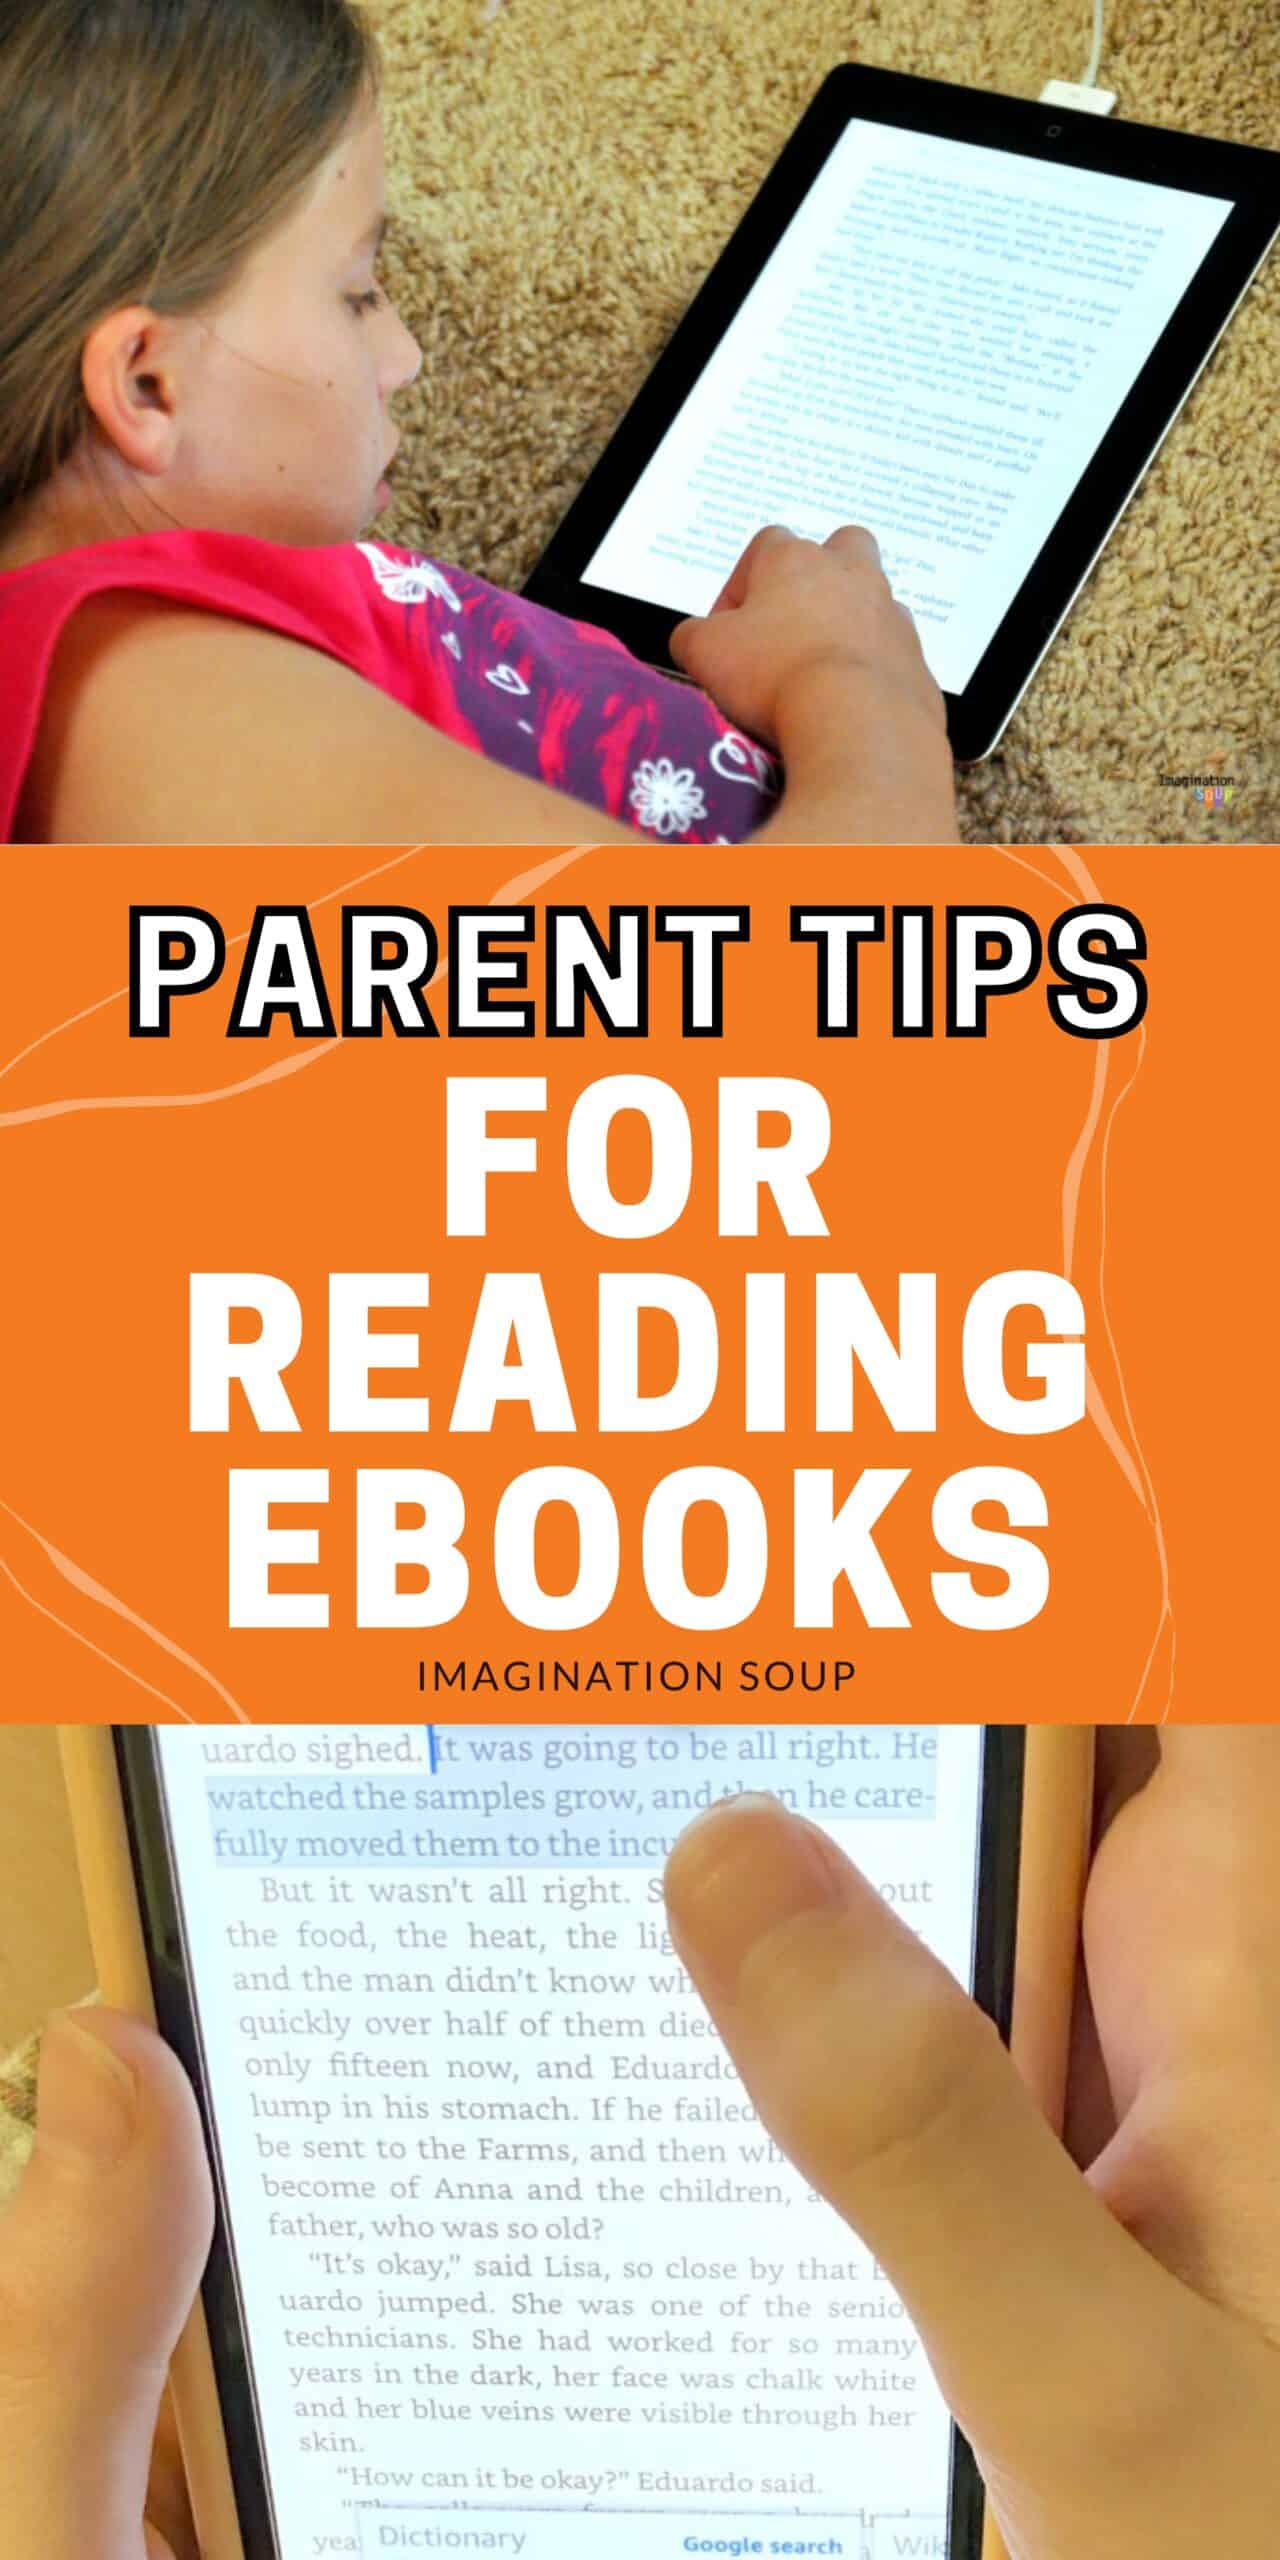 As parents and educators, we must look for the many possible ways for children to read. This includes   online books for kids (ebooks) on the iPad, Kindle, NOOK, or any device with reading apps like the free Kindle app.